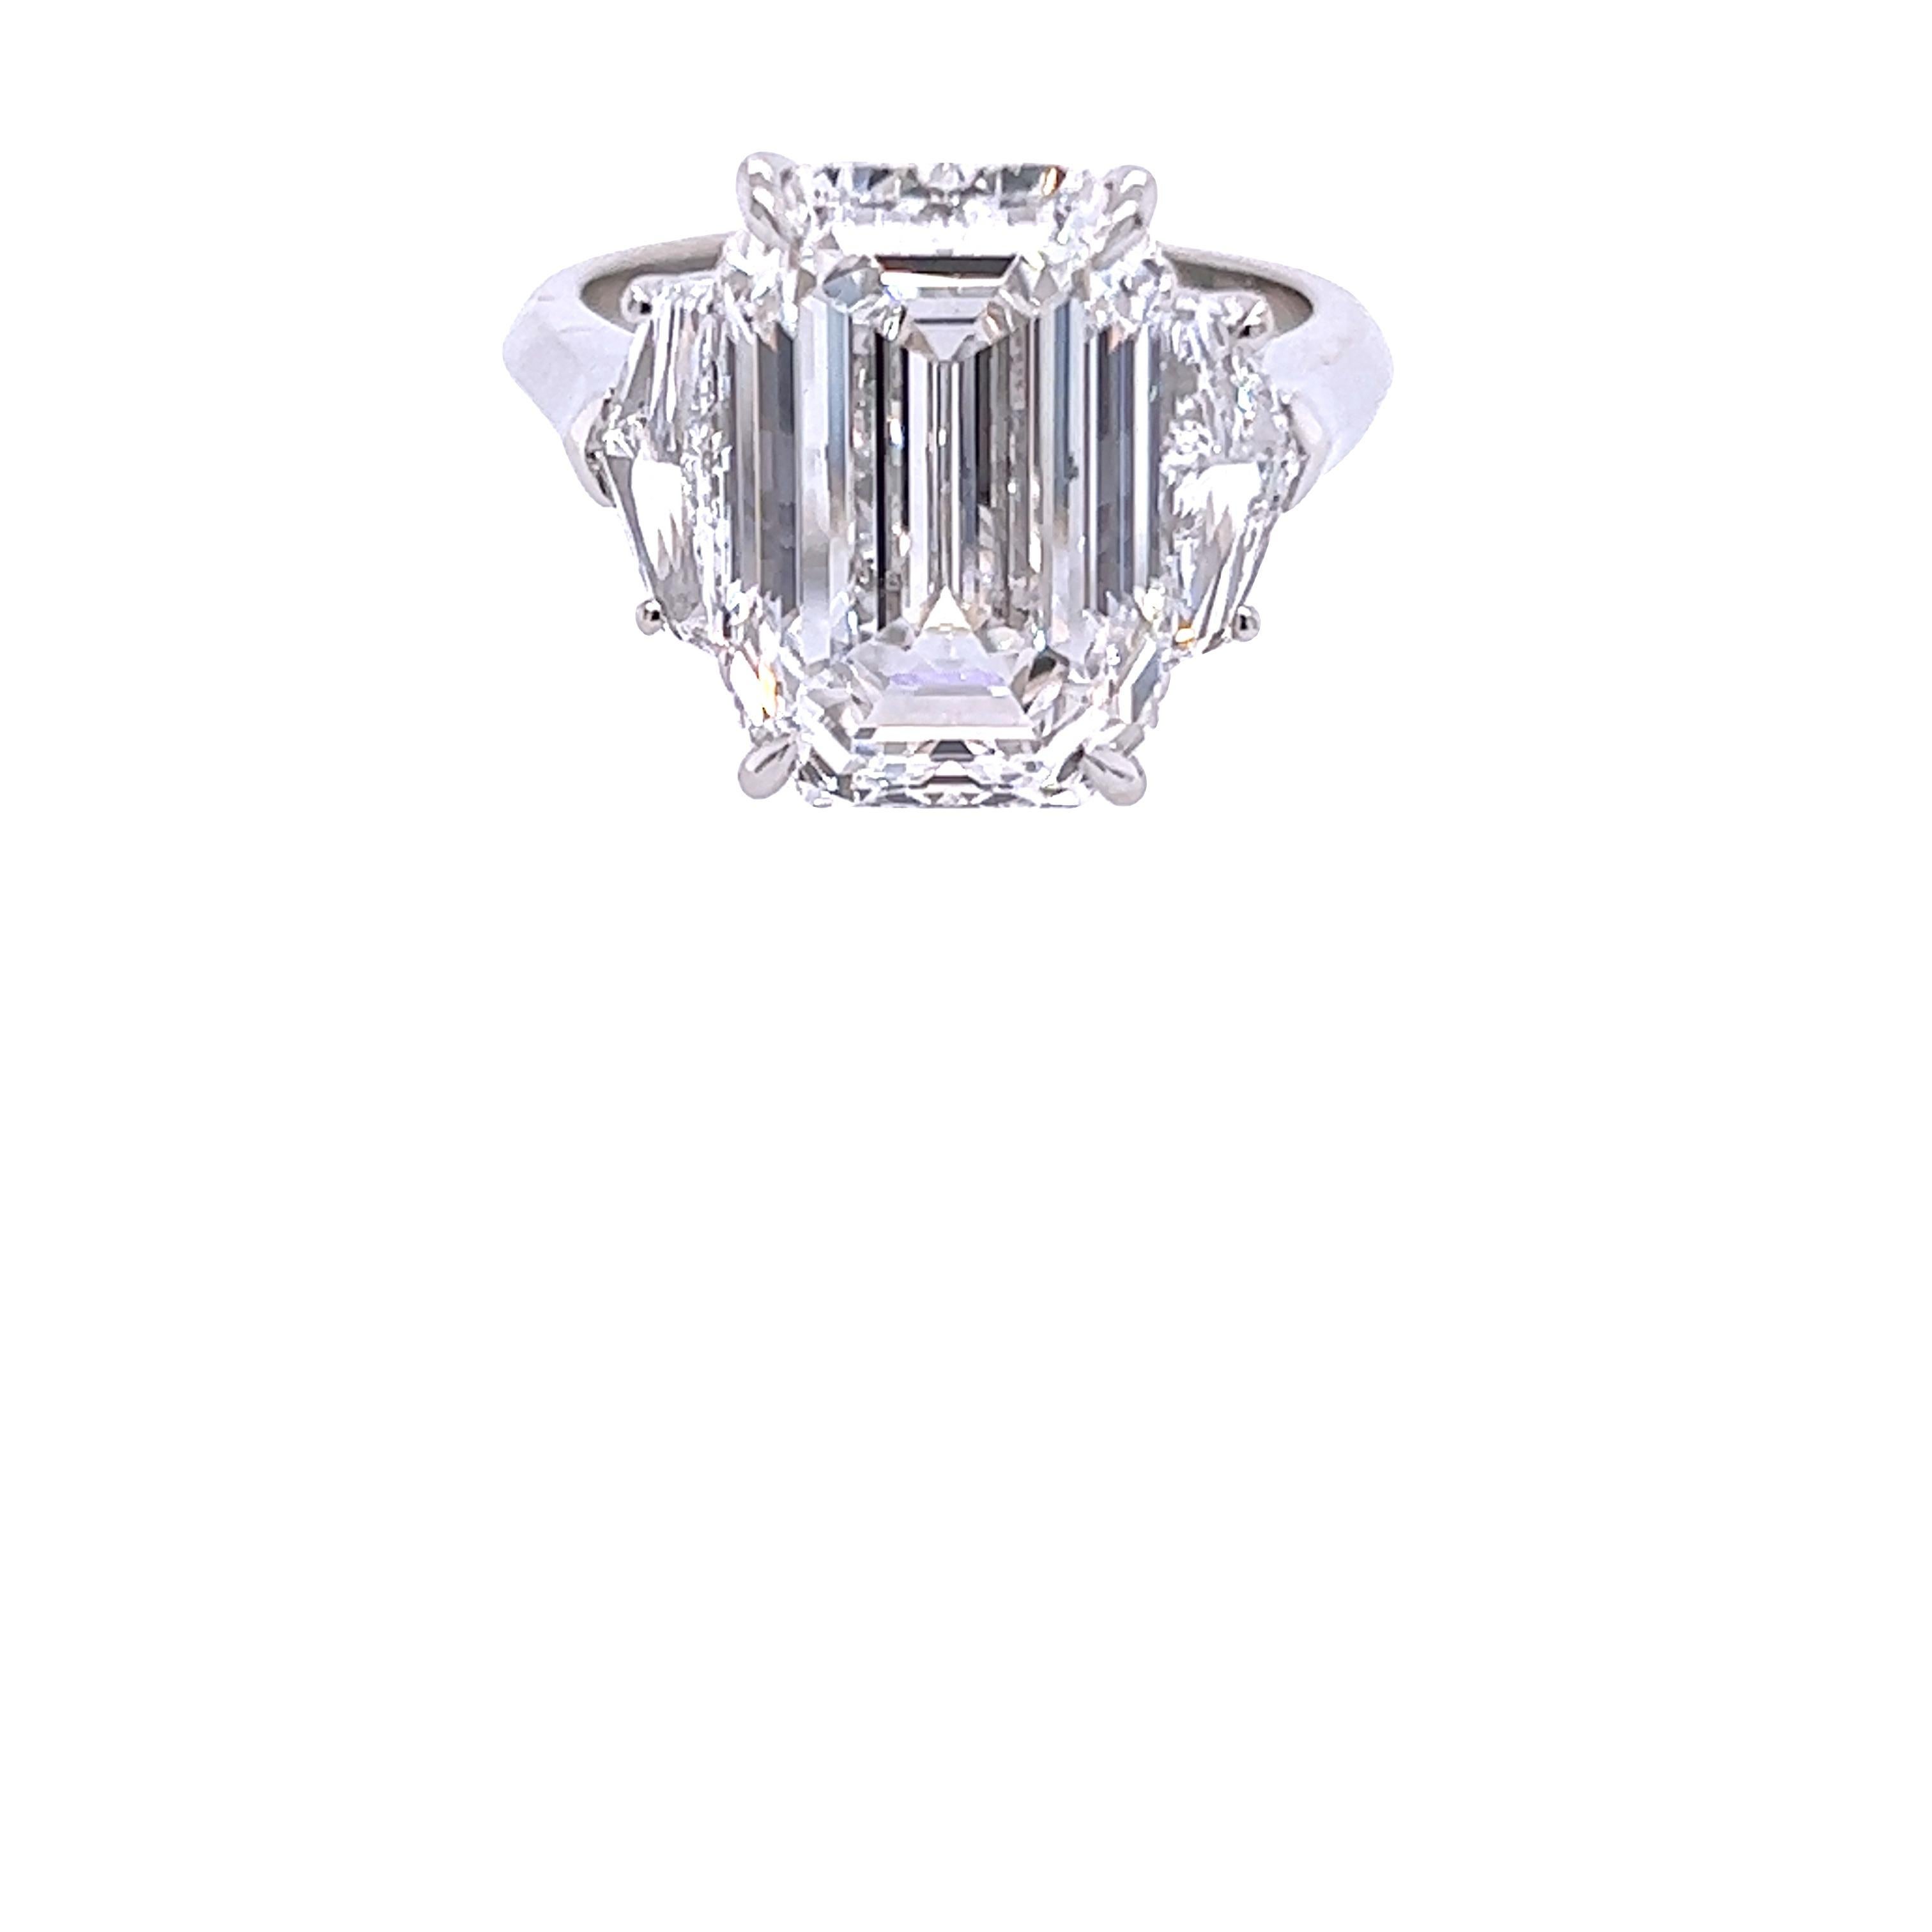 Rosenberg Diamonds & Co. 7.03 carat Emerald cut D color VS2 clarity is accompanied by a GIA certificate. This spectacular Emerald is set in a handmade platinum setting with perfectly matched pair of Epaulette side stones flanking on both sides with